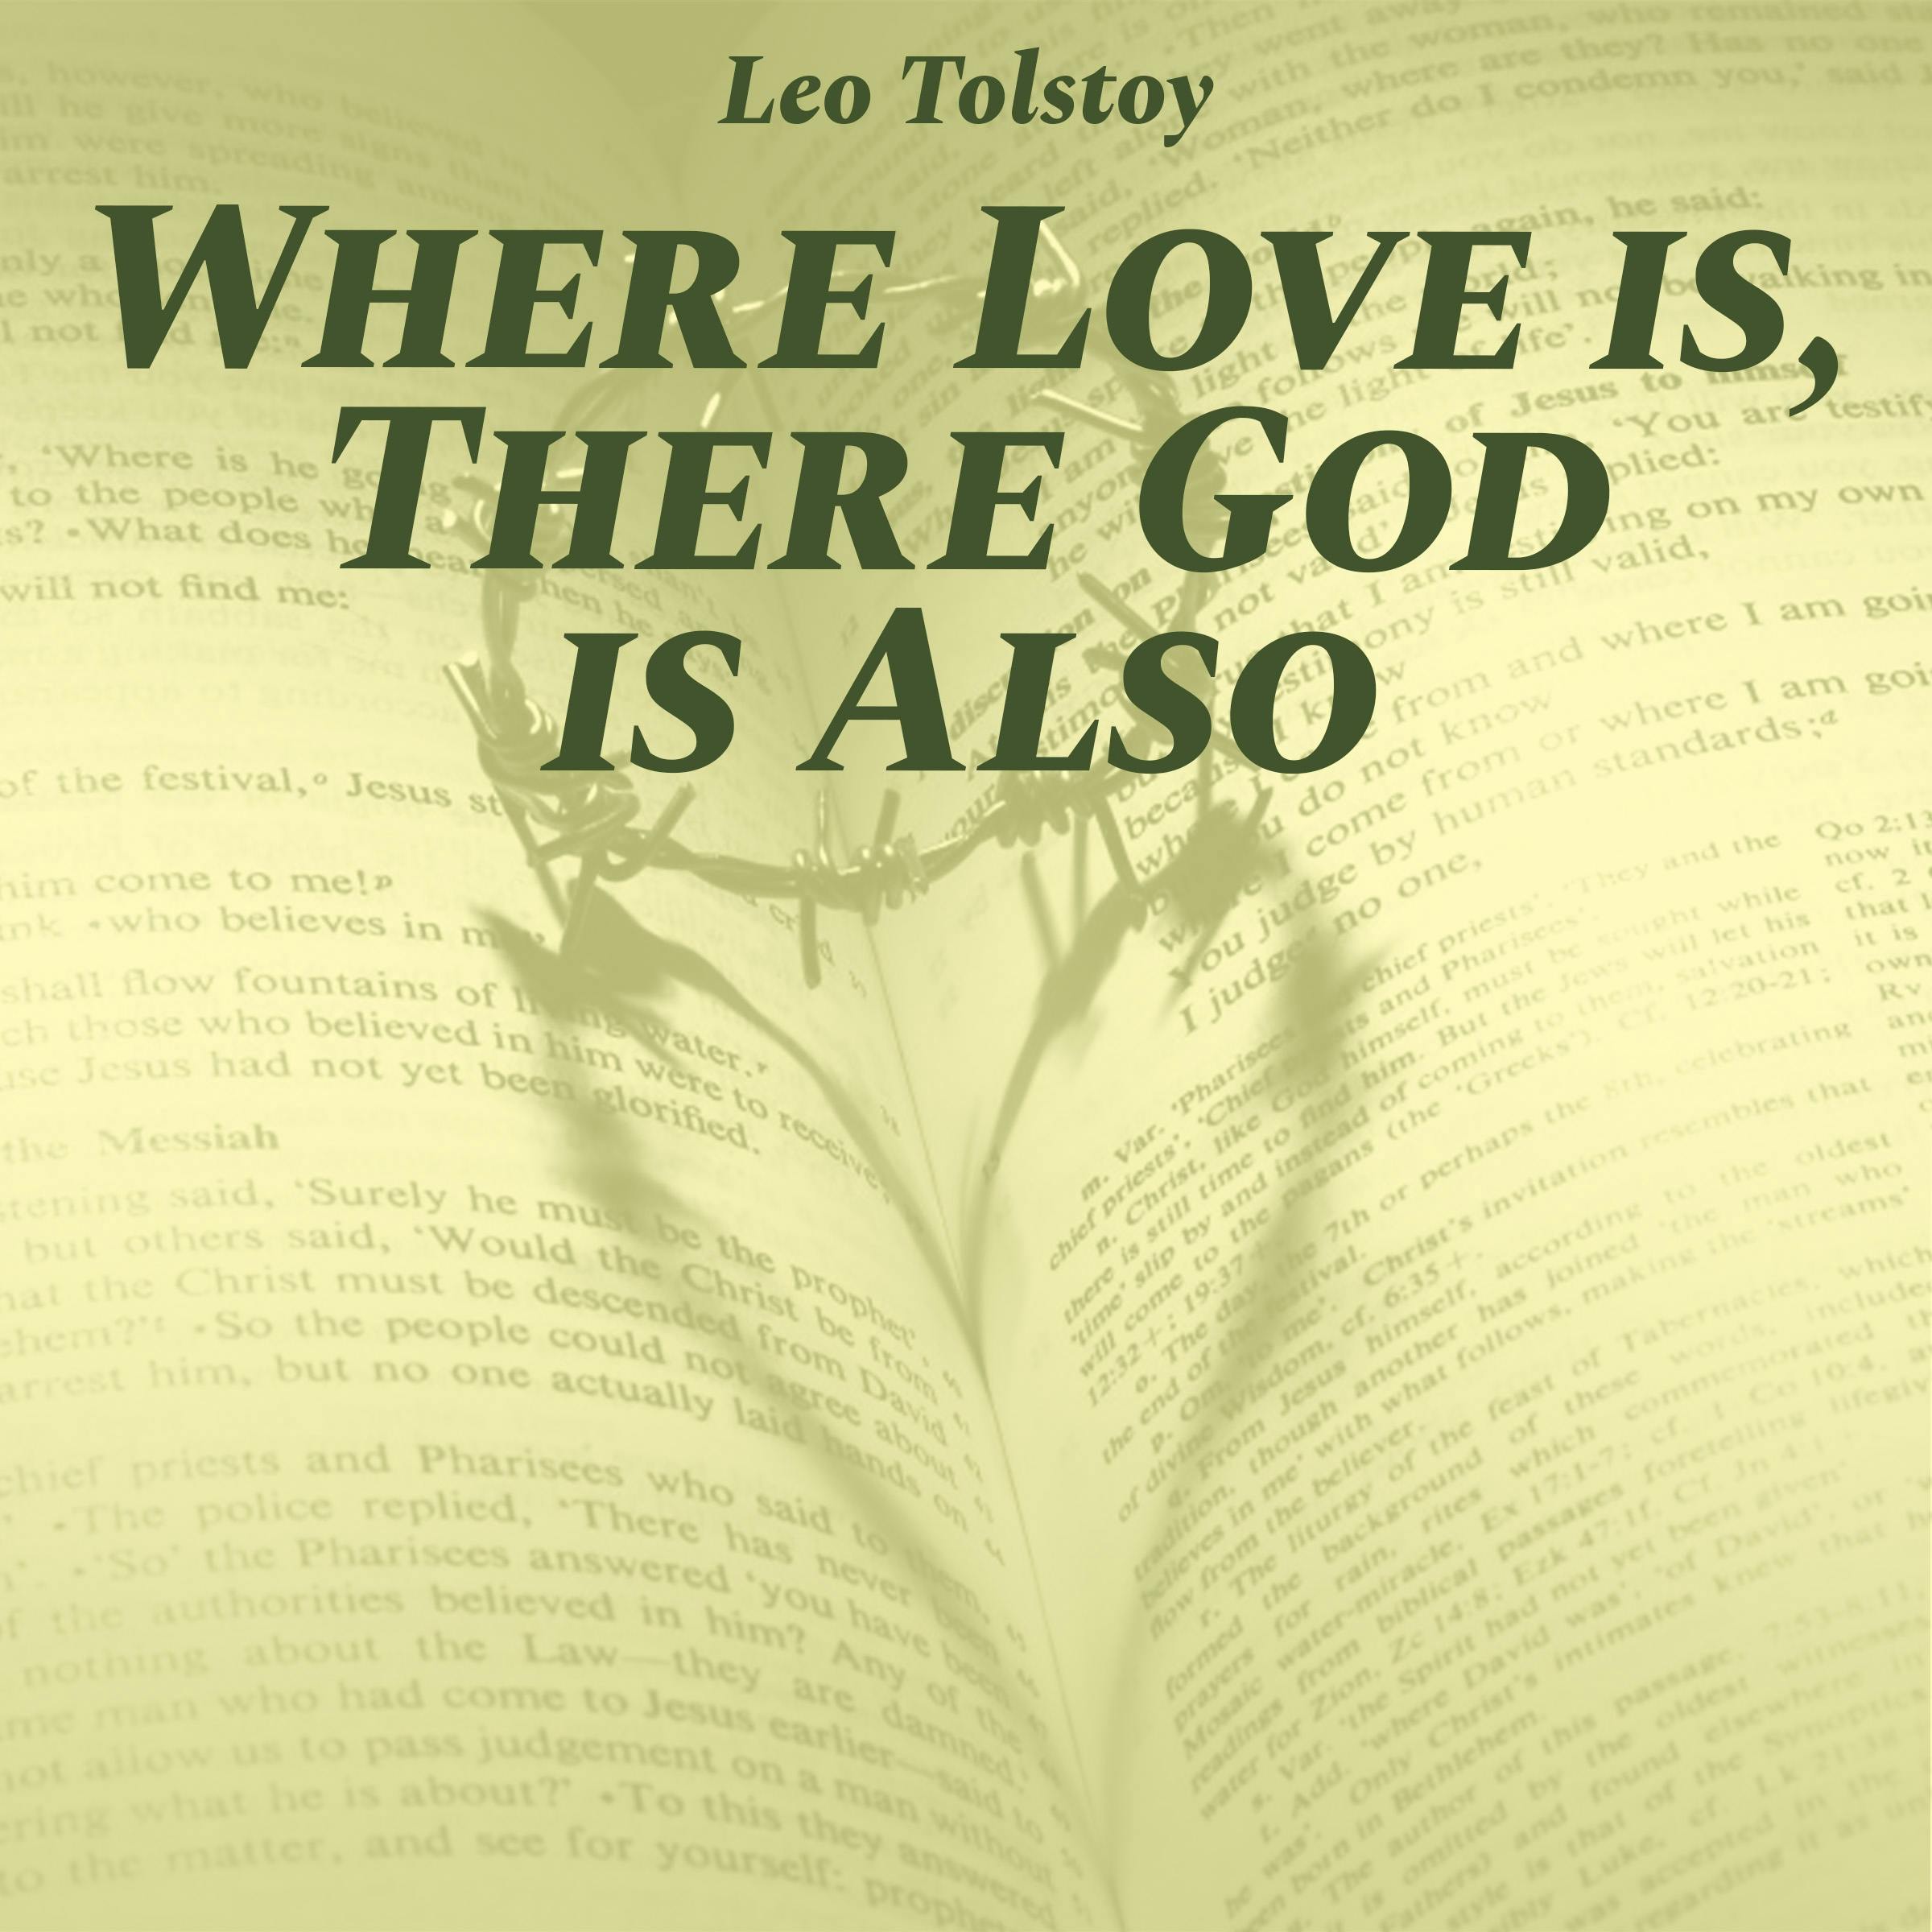 Where Love Is, There God Is Also - undefined